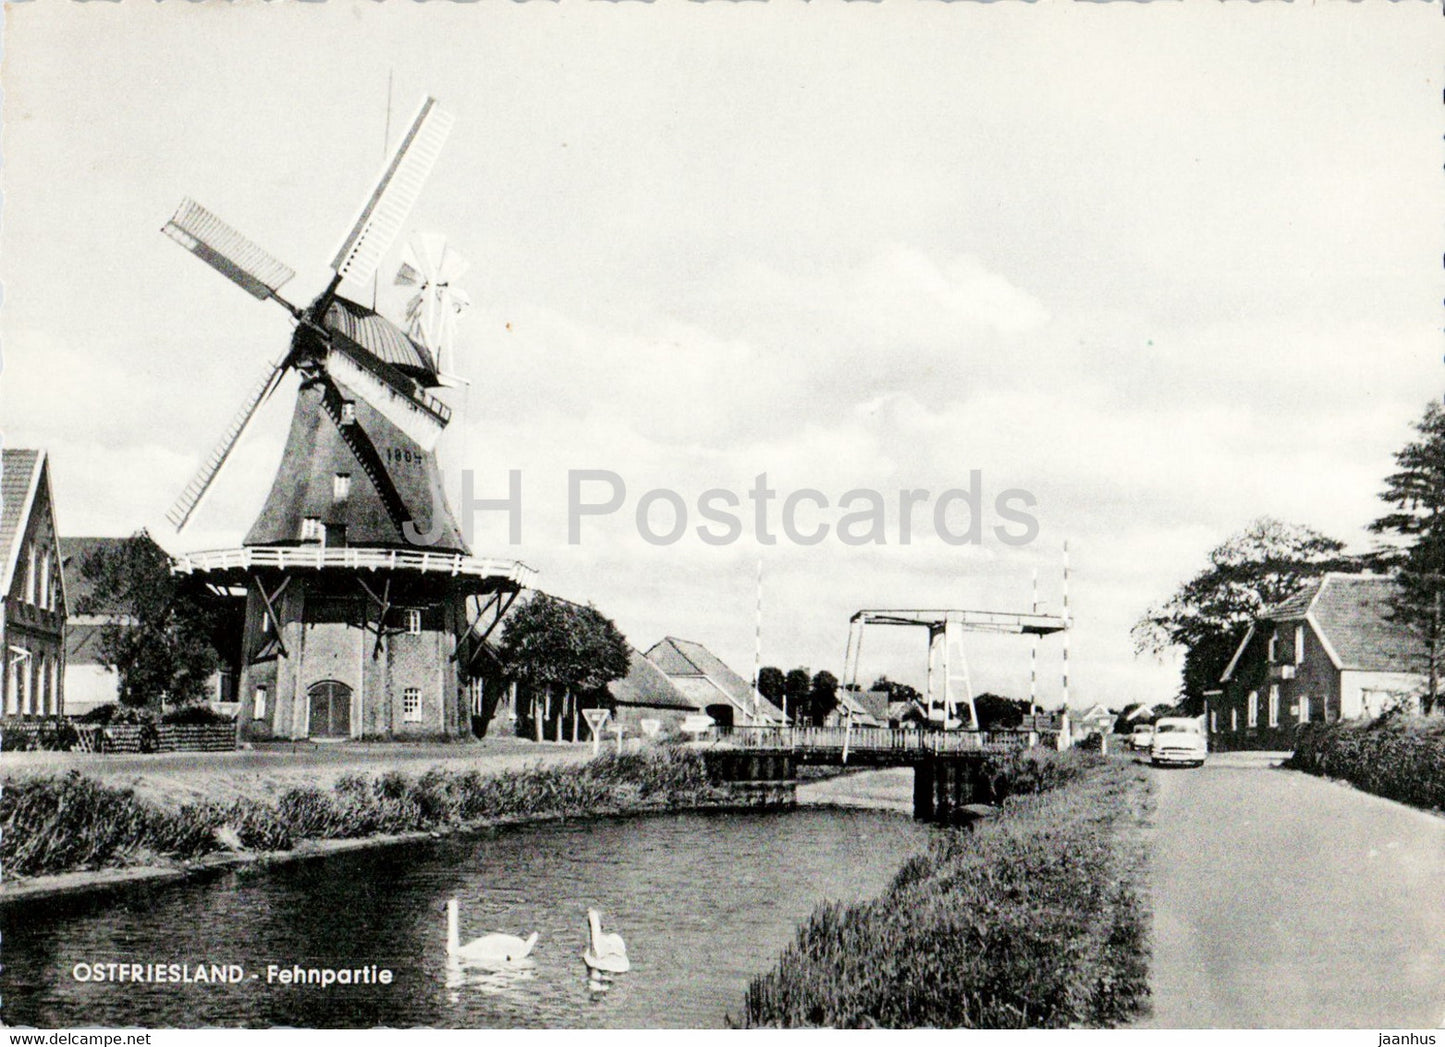 Ostfriesland - Fehnpartie - windmill - old postcard - Germany - used - JH Postcards